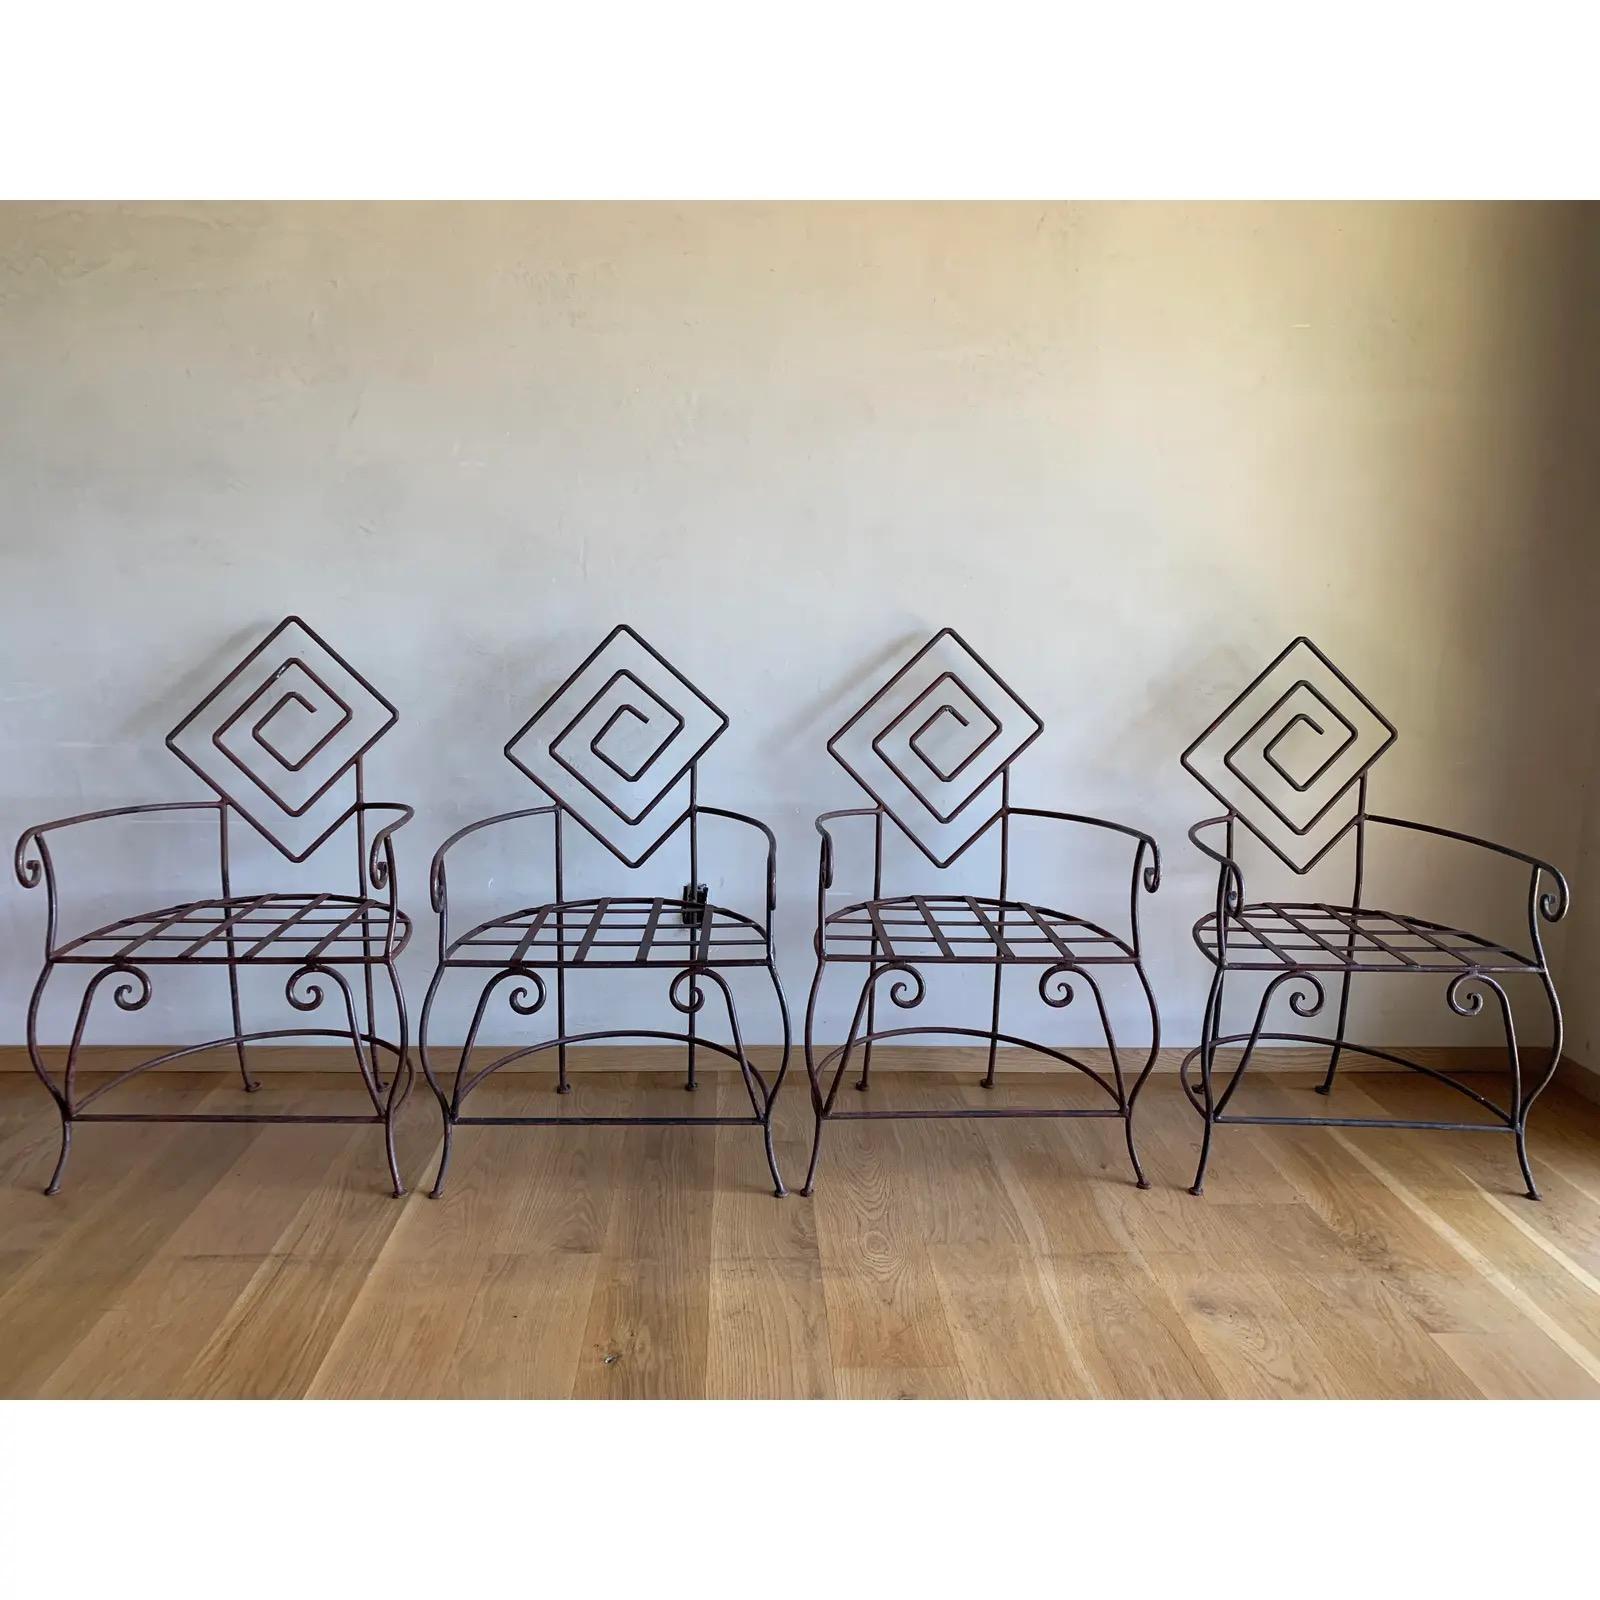 Vintage Artisan Iron Geometric Sculptural Frank Lloyd Wright Style Armchairs-4 For Sale 6